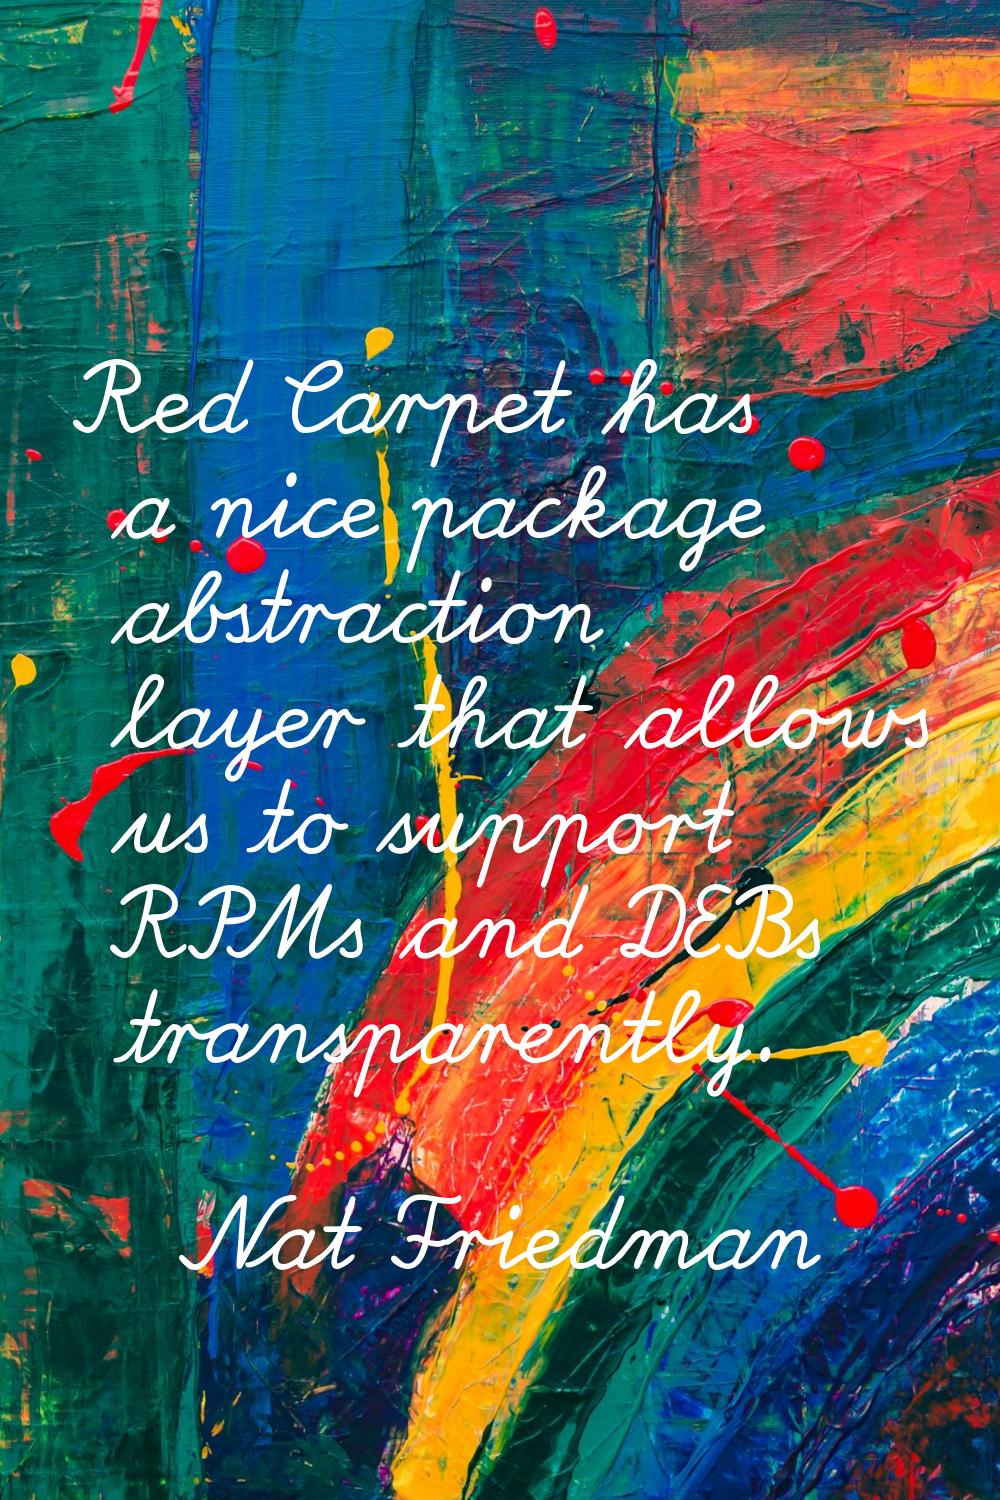 Red Carpet has a nice package abstraction layer that allows us to support RPMs and DEBs transparent